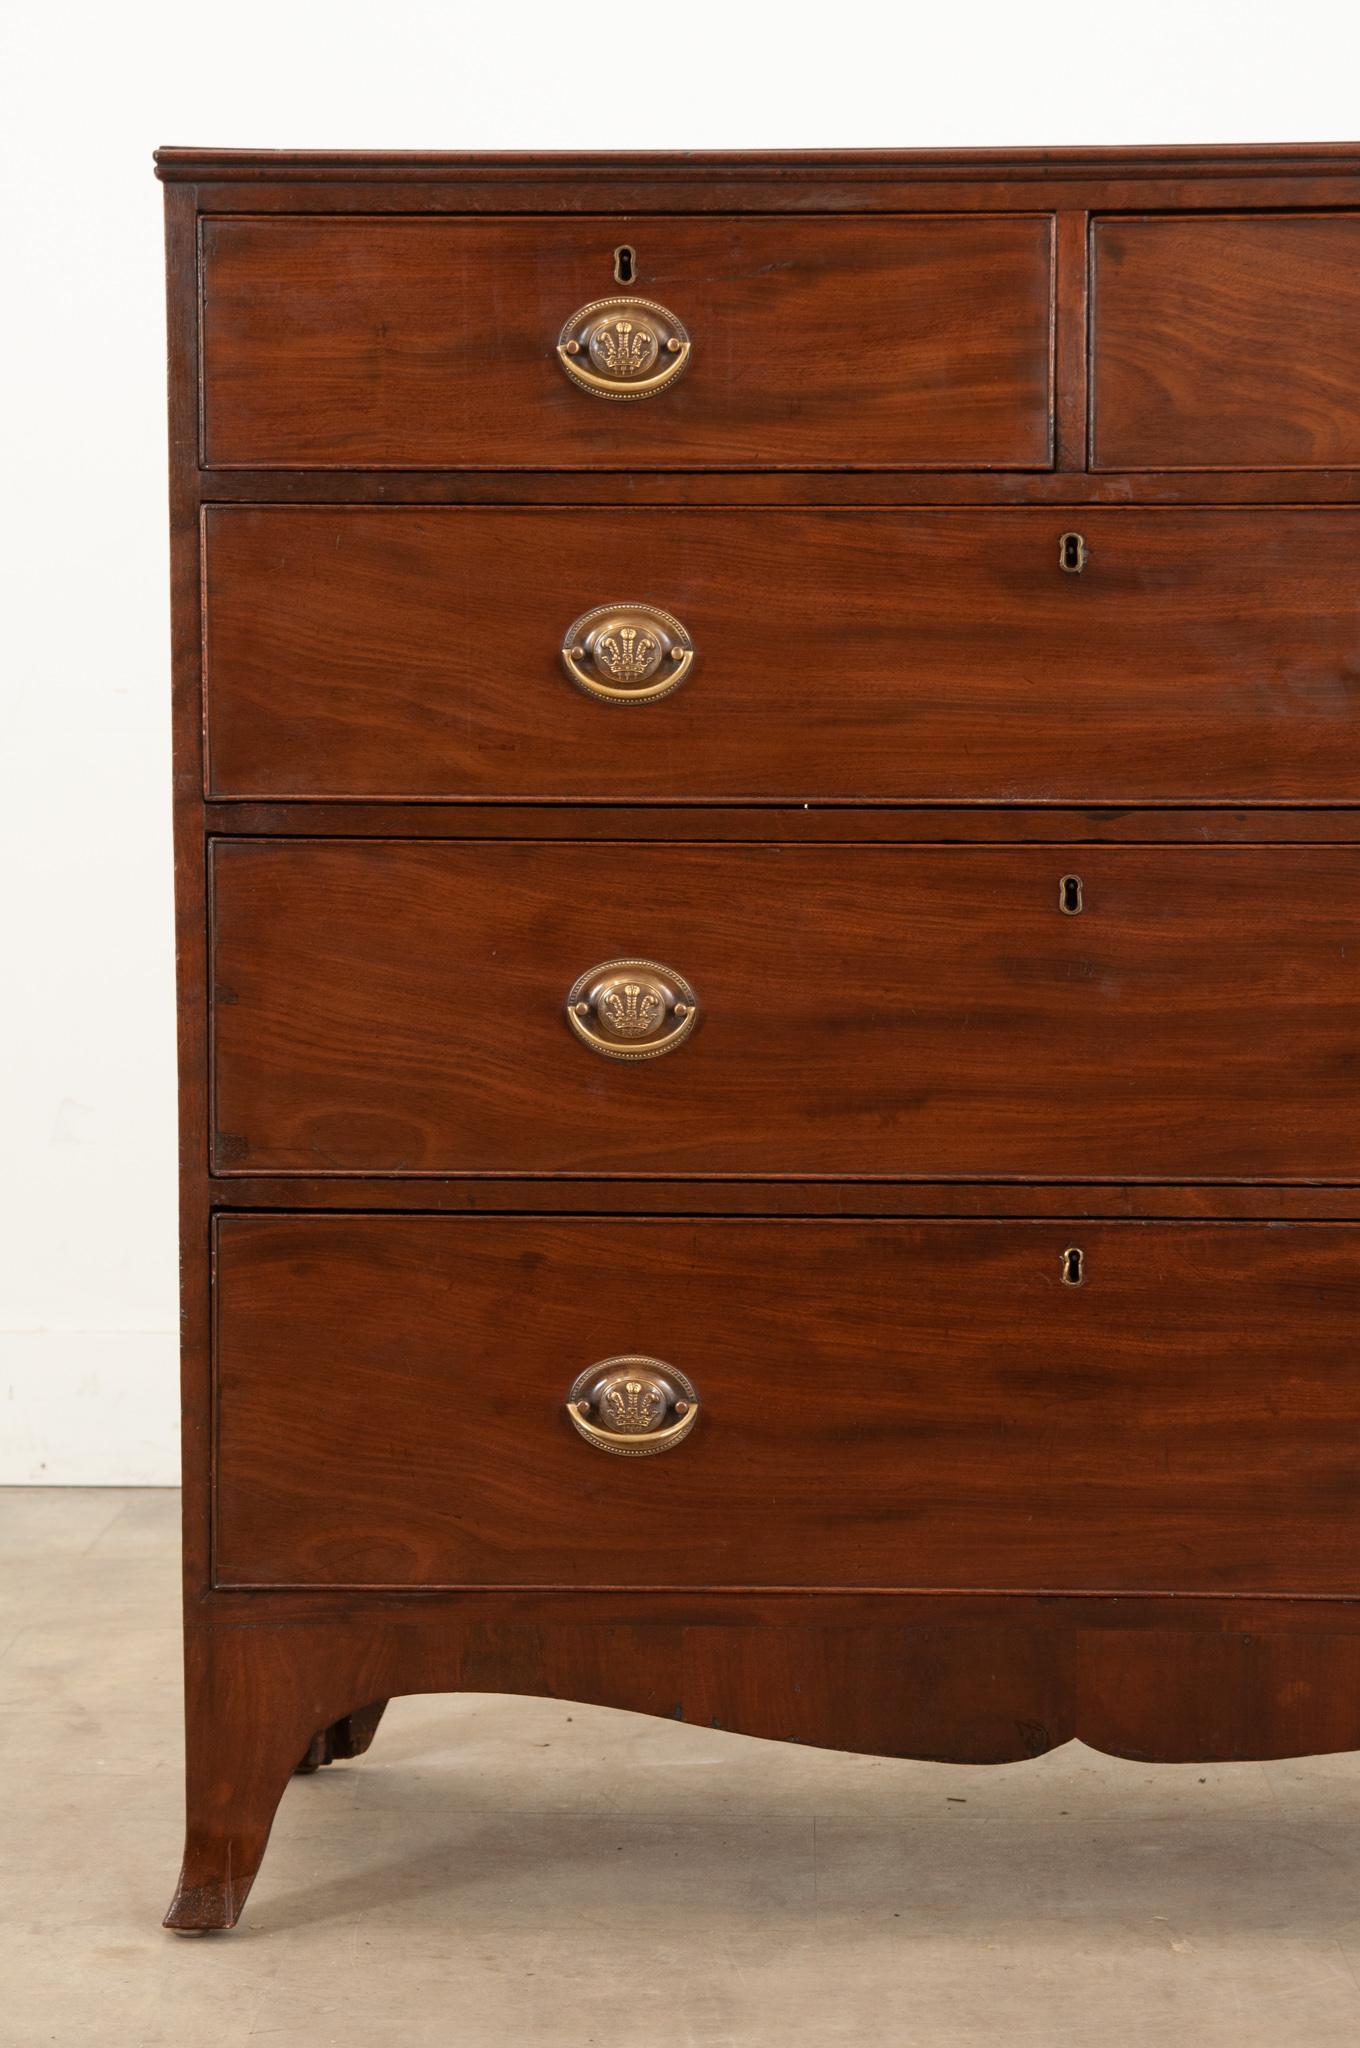 English 19th Century Georgian Mahogany Chest of Drawers In Good Condition For Sale In Baton Rouge, LA